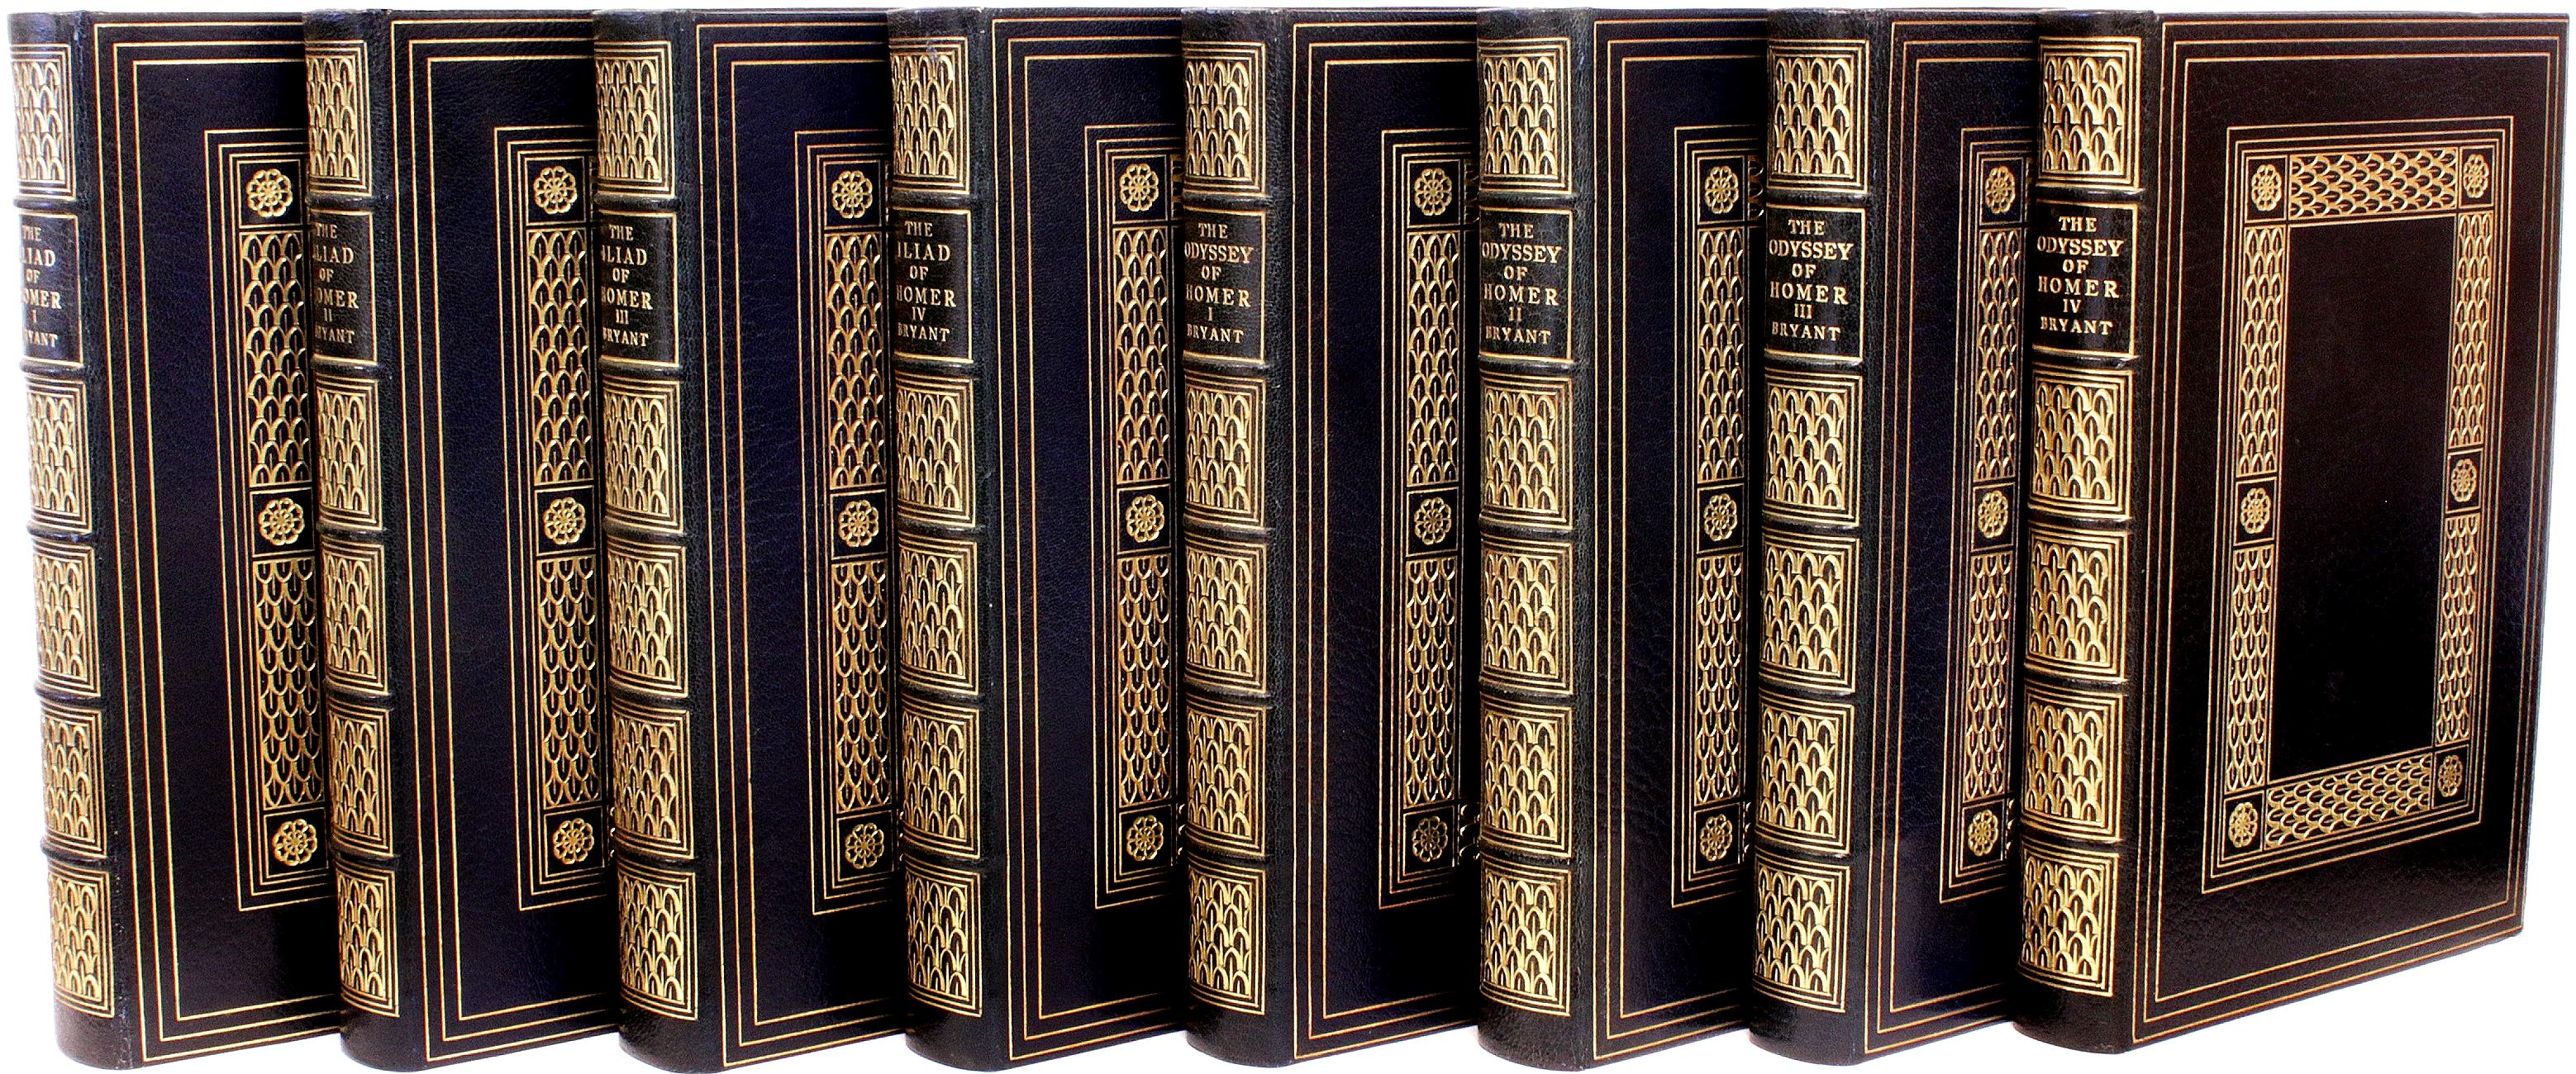 AUTHOR: HOMER (William Cullen Bryant). 

TITLE: The Iliad - and - The Odyssey of Homer.

PUBLISHER: Boston: Houghton Mifflin & Co., 1905.

DESCRIPTION: LARGE PAPER EDITION. 8 vols., large octavo, 10-11/16